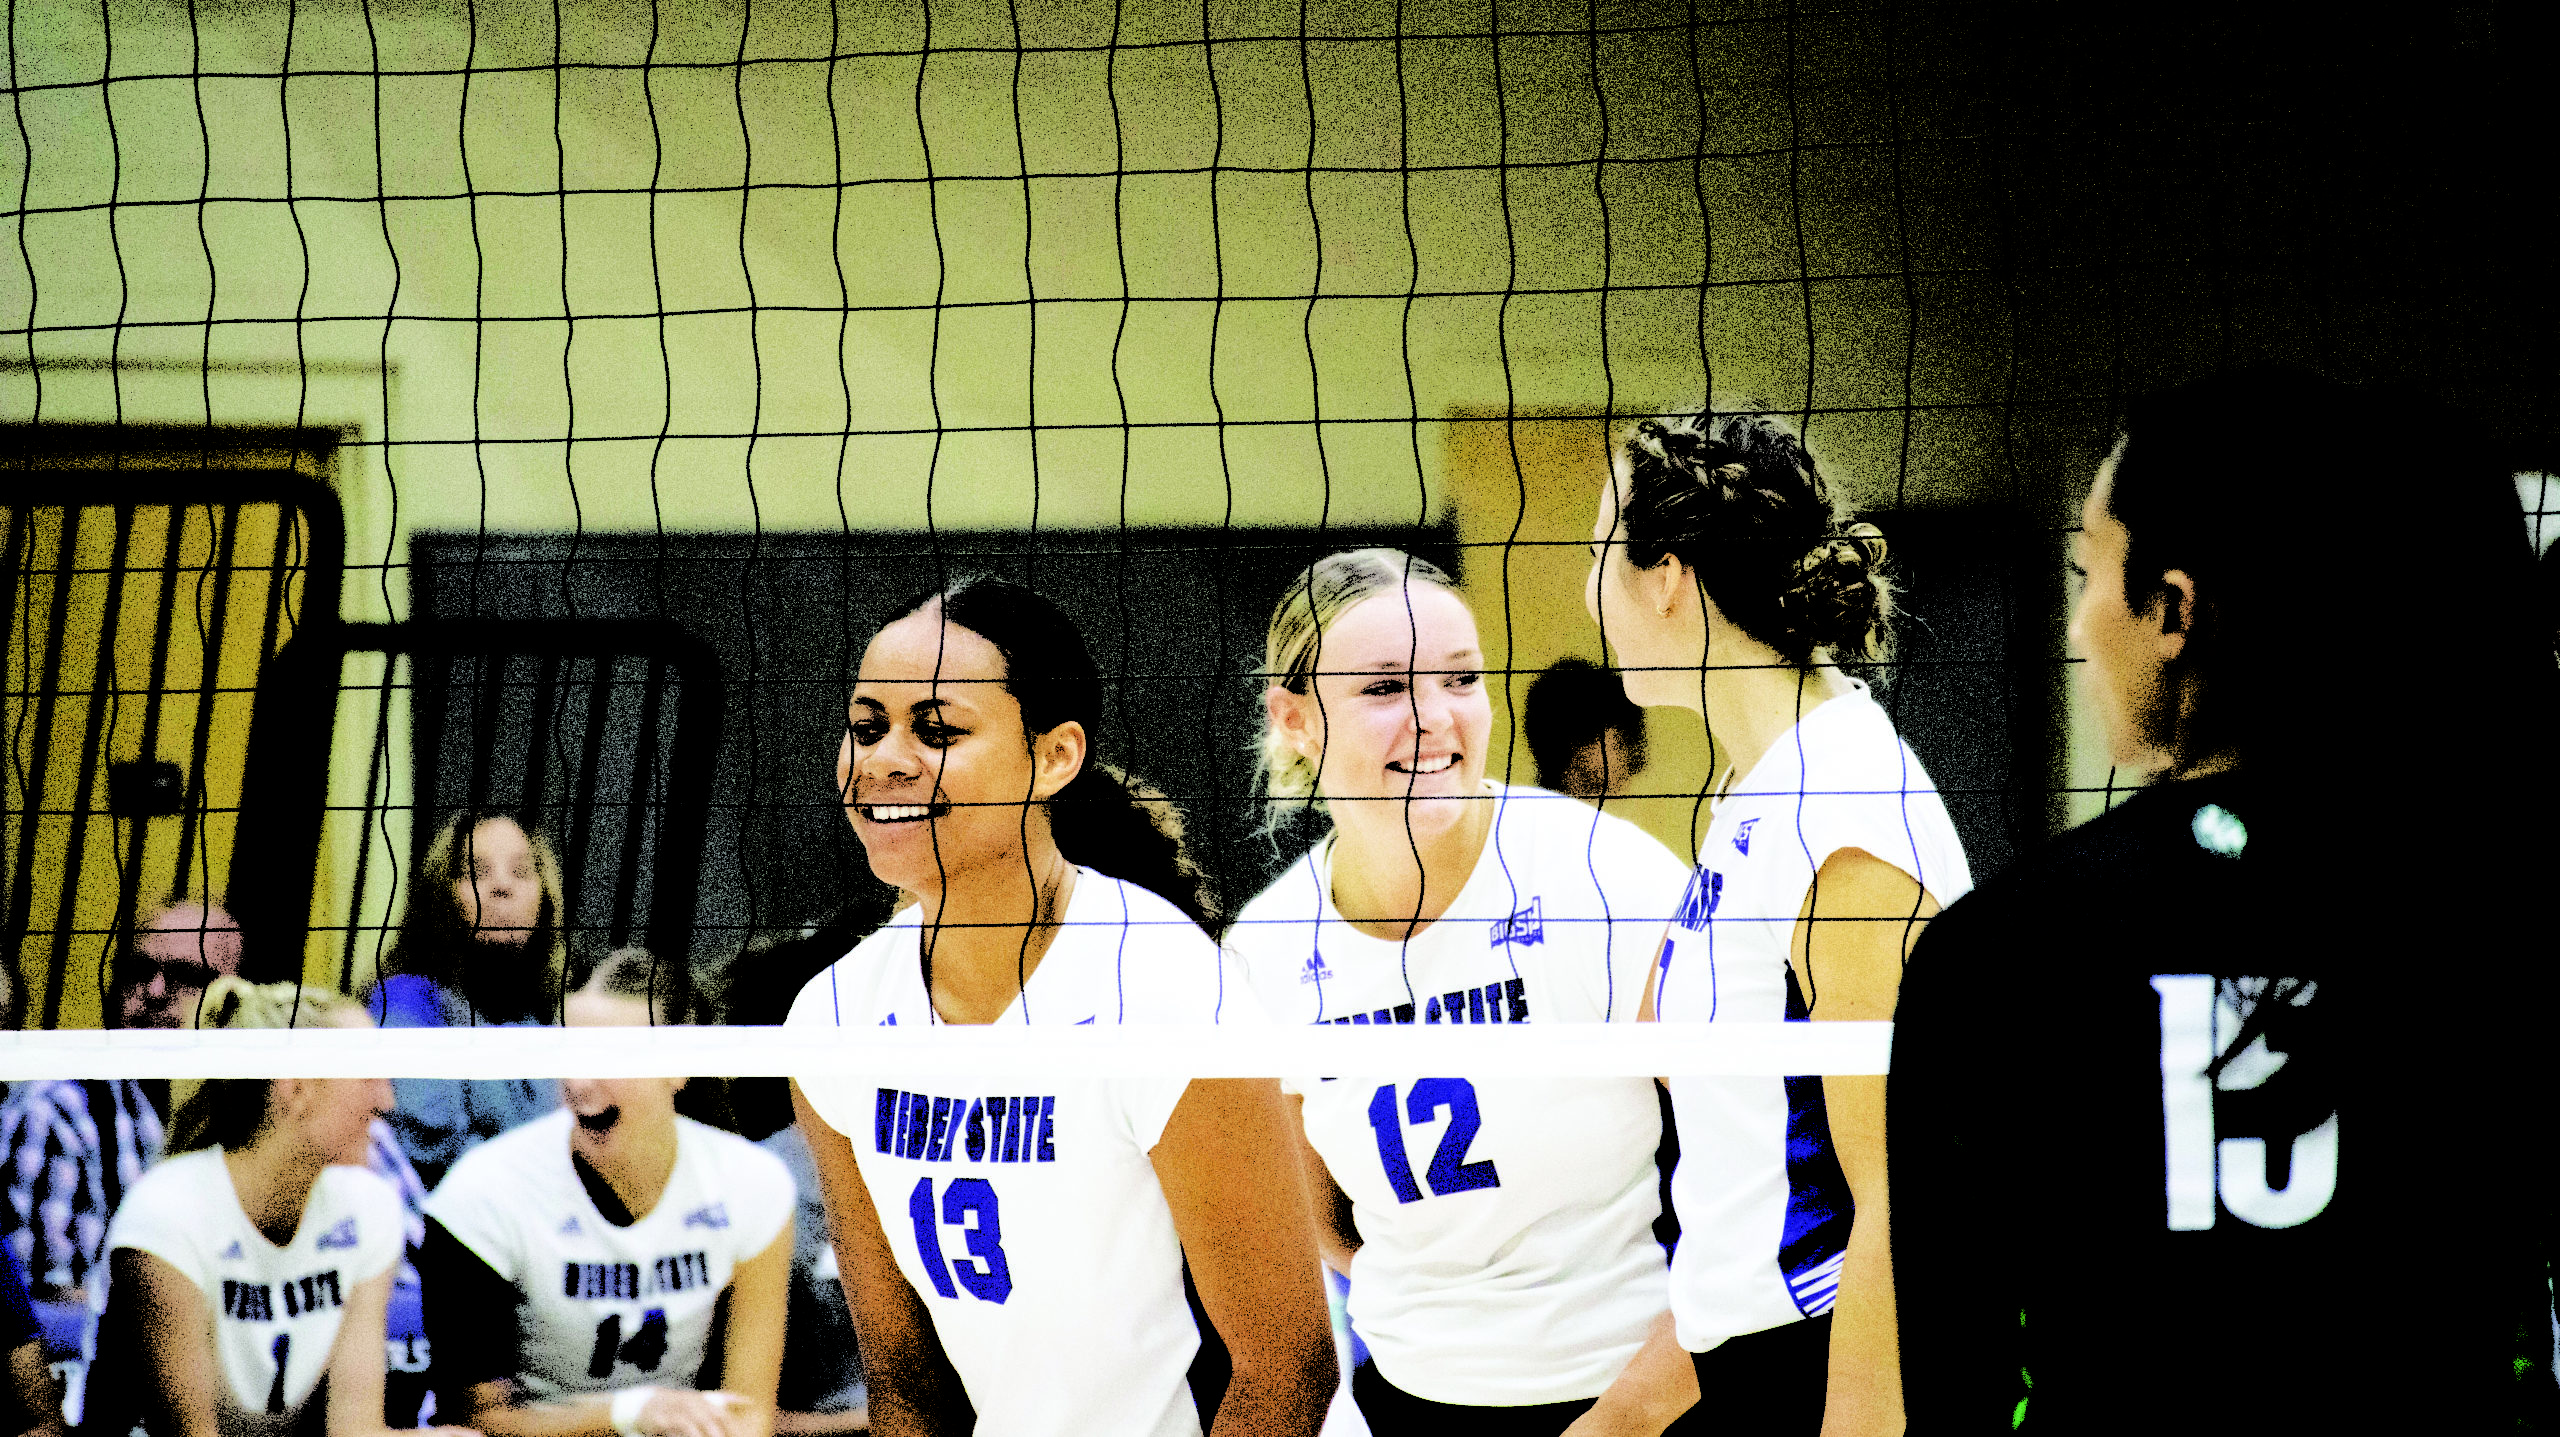 Team smiles after scoring a point. (AJ Handley/ The Signpost)